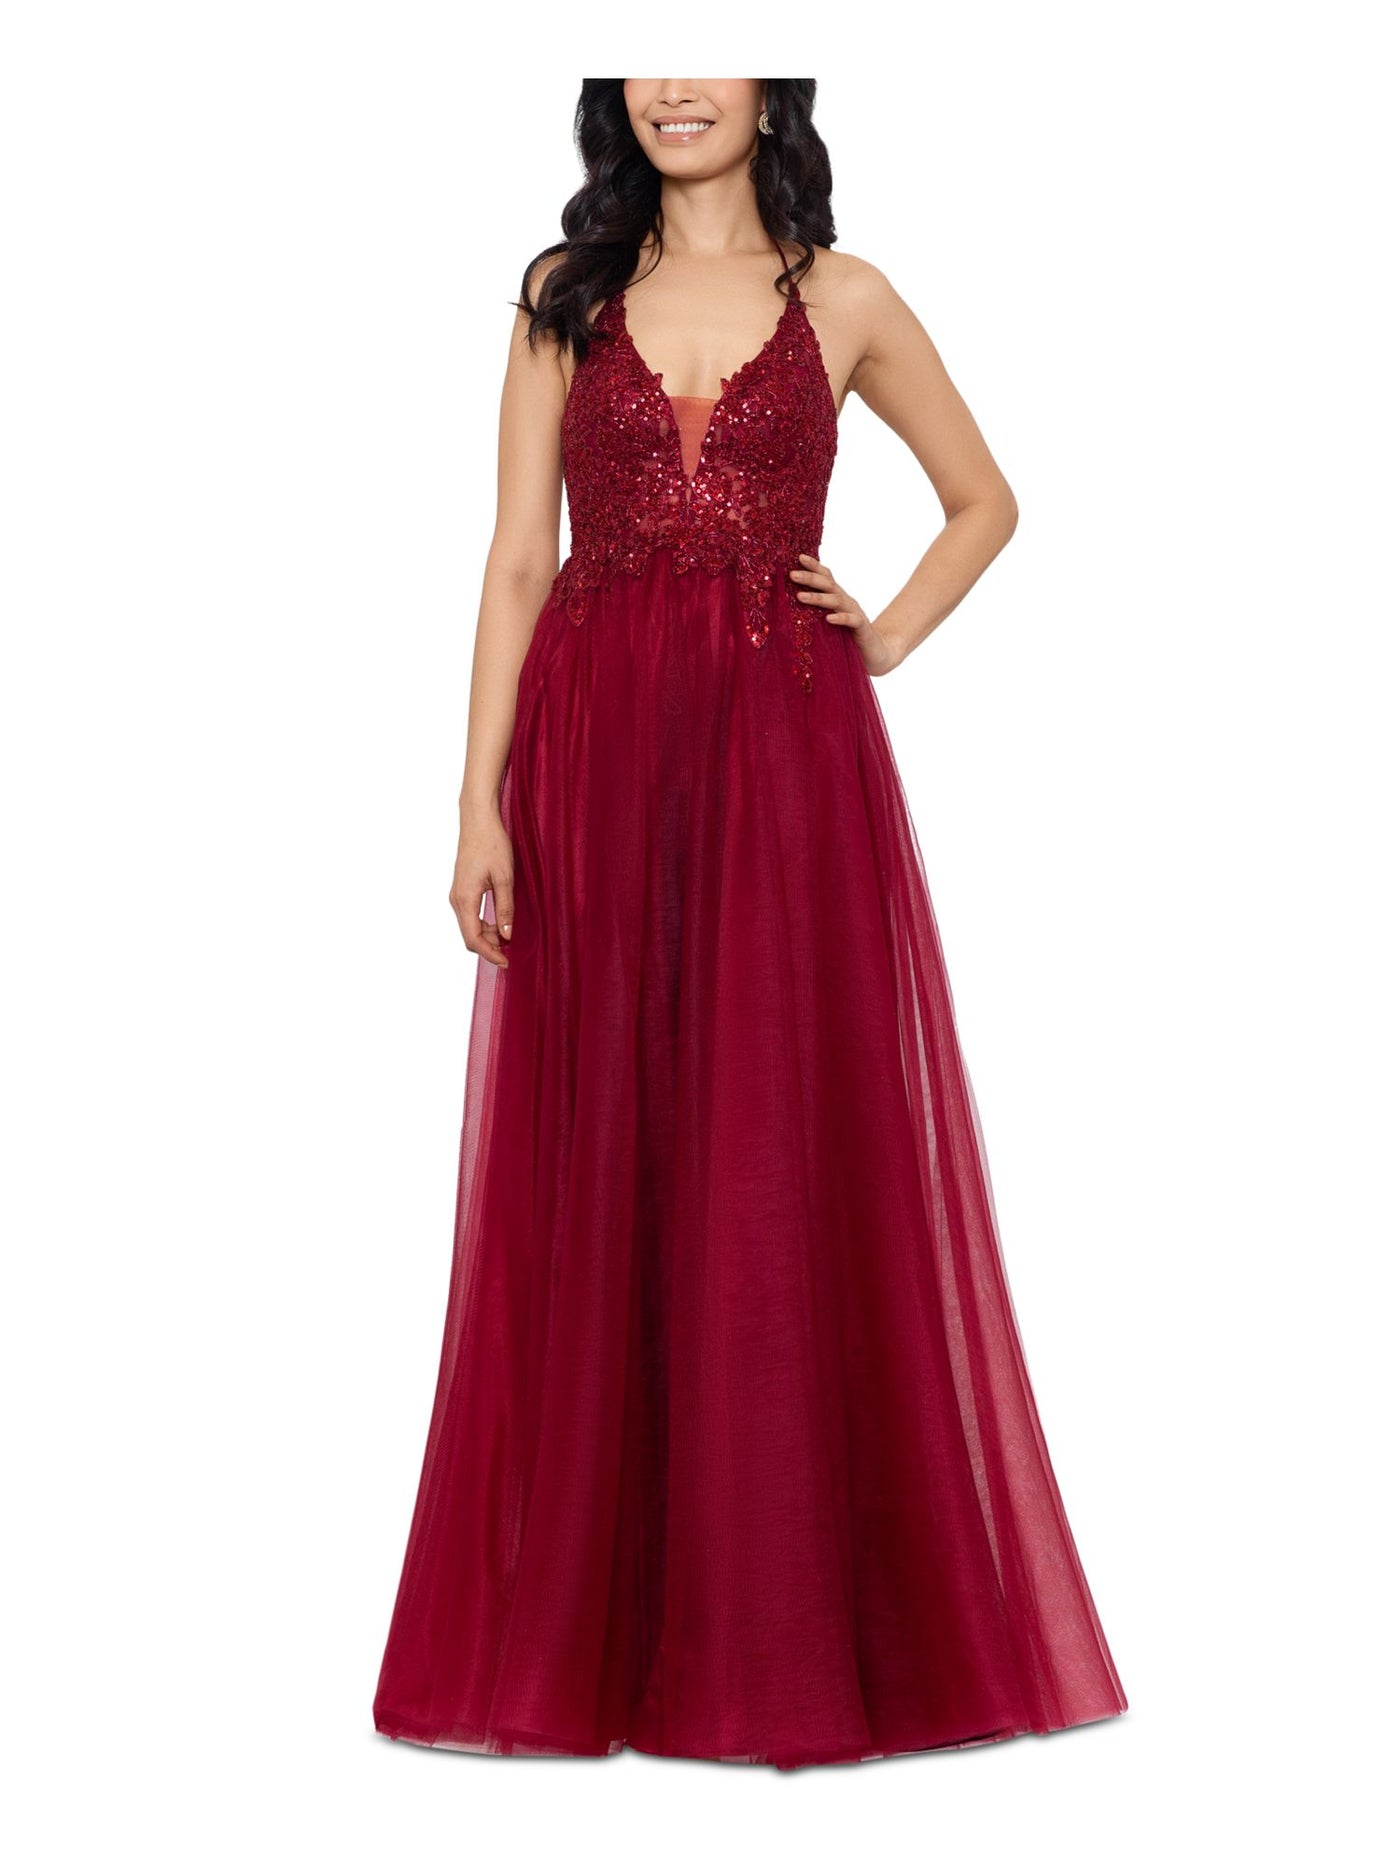 BLONDIE NITES Womens Maroon Sequined Zippered Lined Sleeveless V Neck Full-Length Prom Gown Dress 15